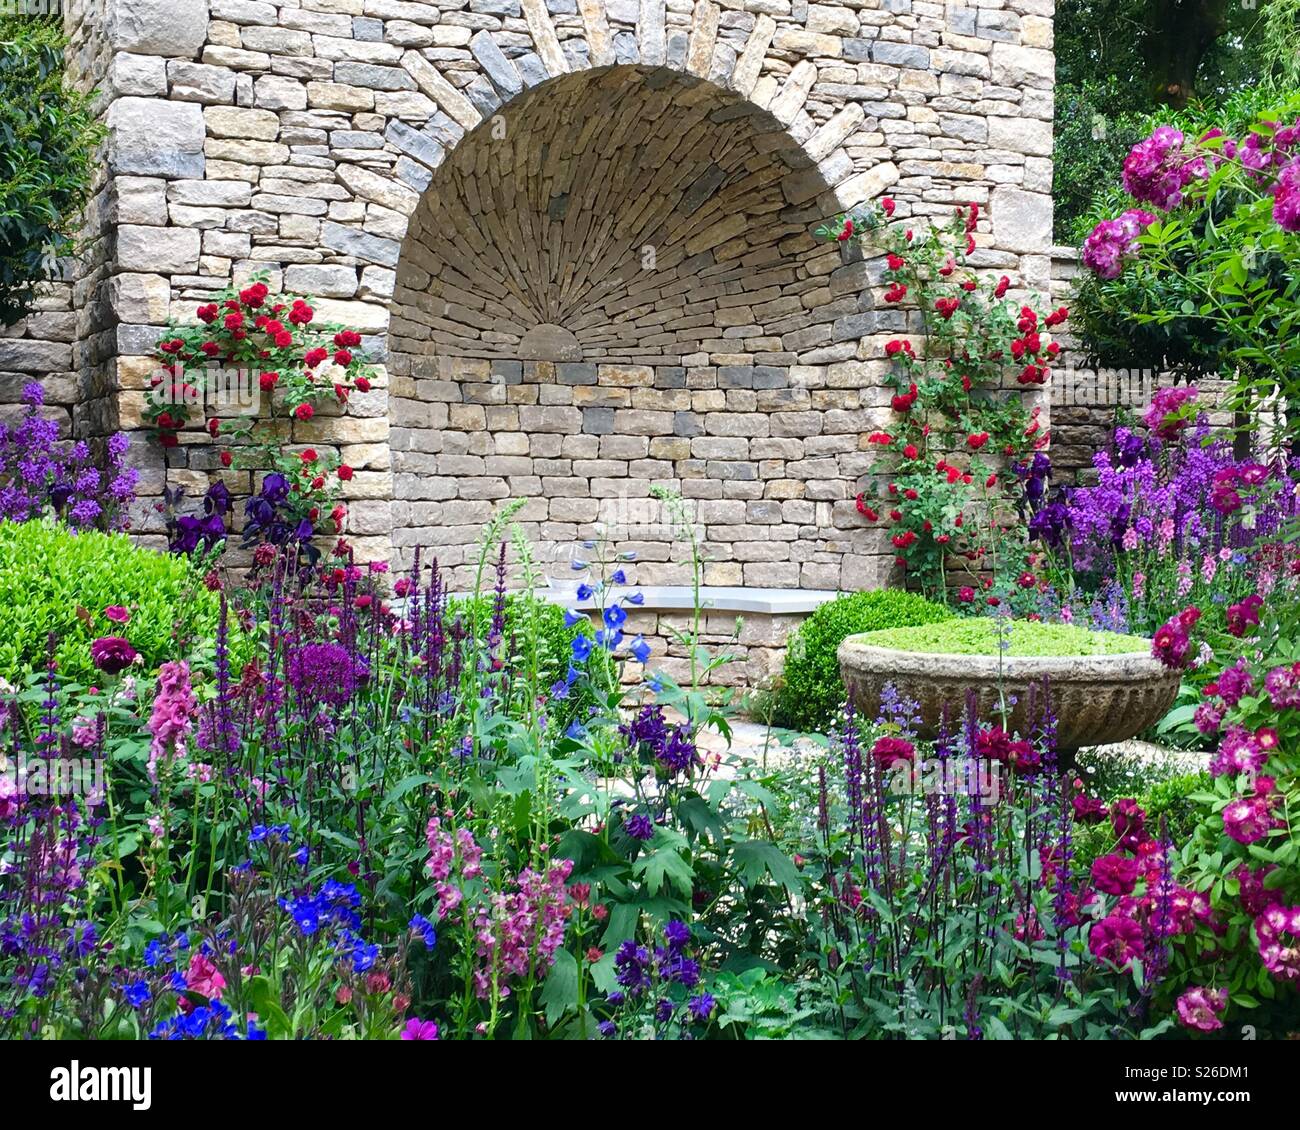 an english garden at chelsea flower show stock photo: 311158401 - alamy